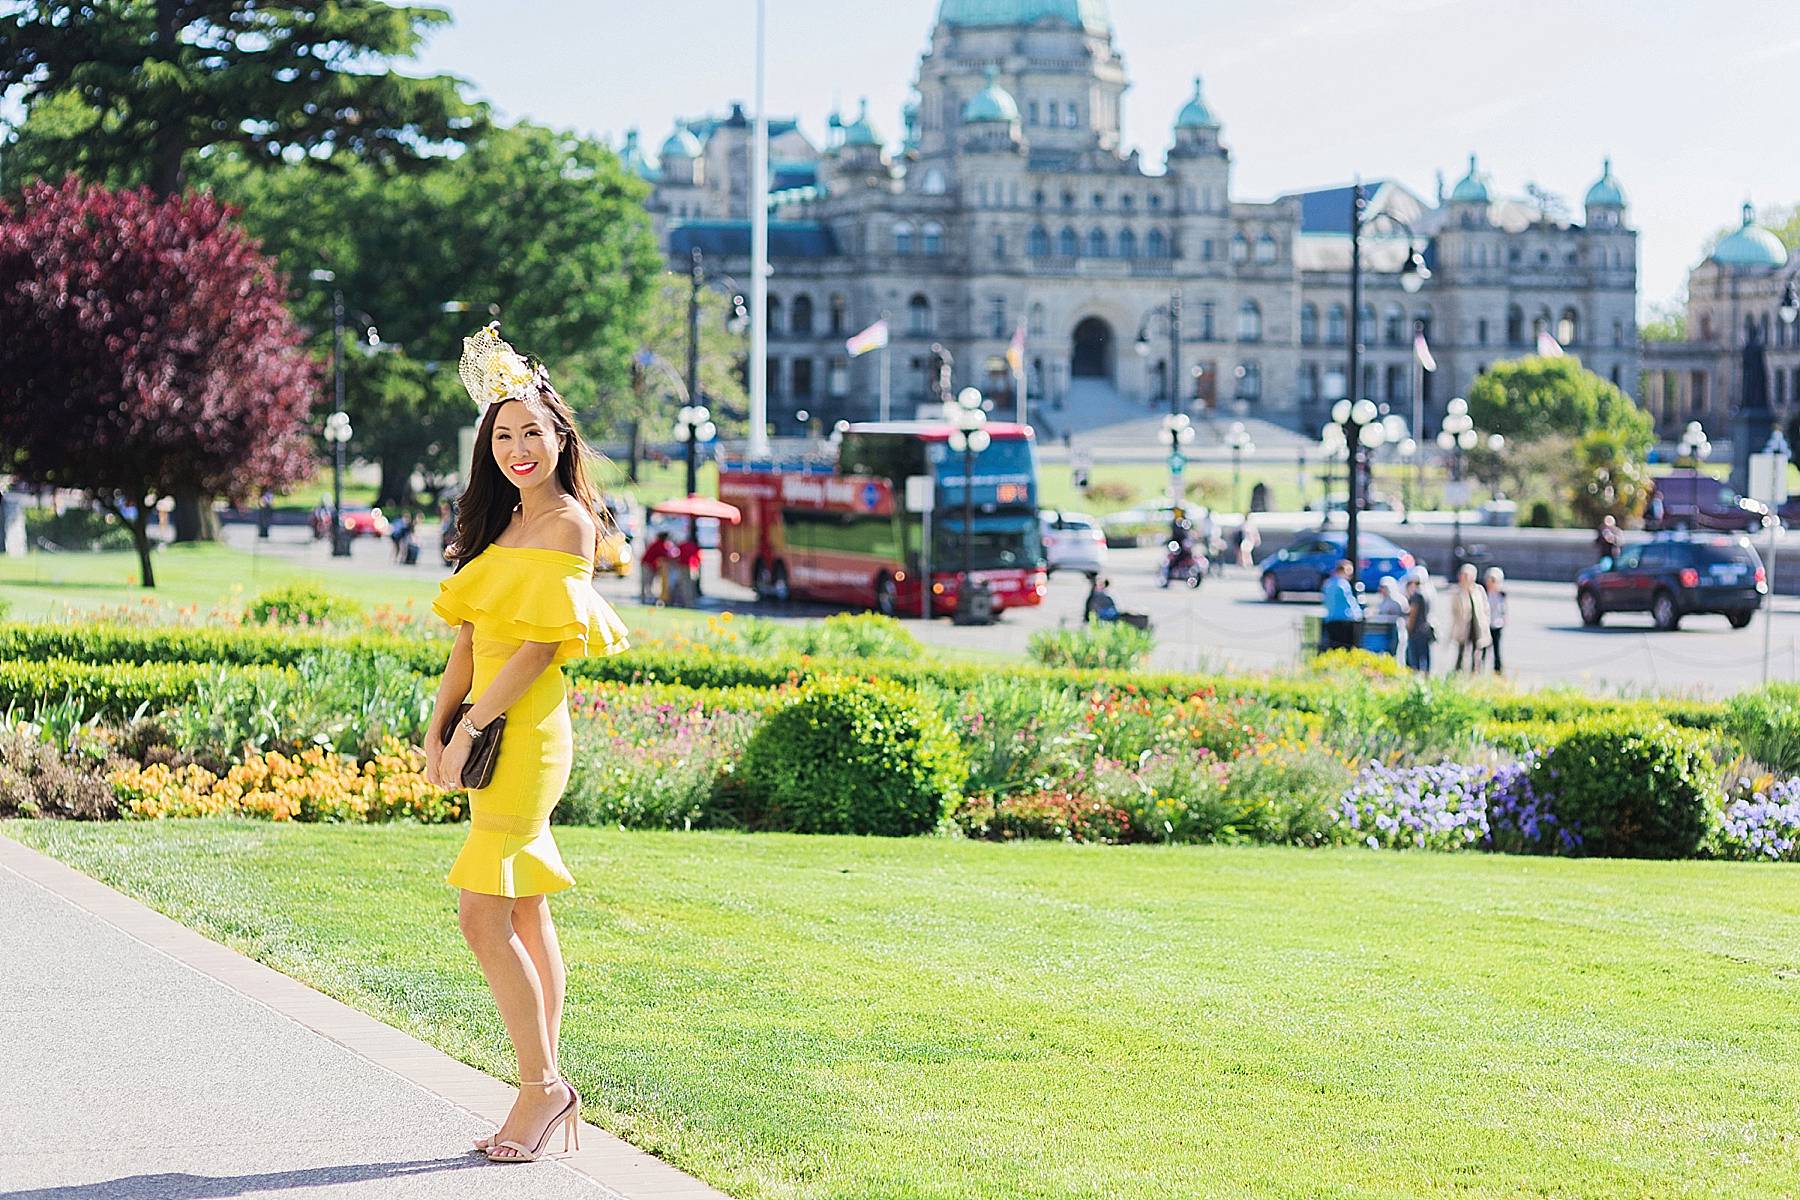 yellow fascinator hat bee hive high tea for bridal shower wedding celebration at empress hotel Victoria Canada wearing yellow off shoulder ruffle dress on blogger Diana Elizabeth standing in front of the Parliament building